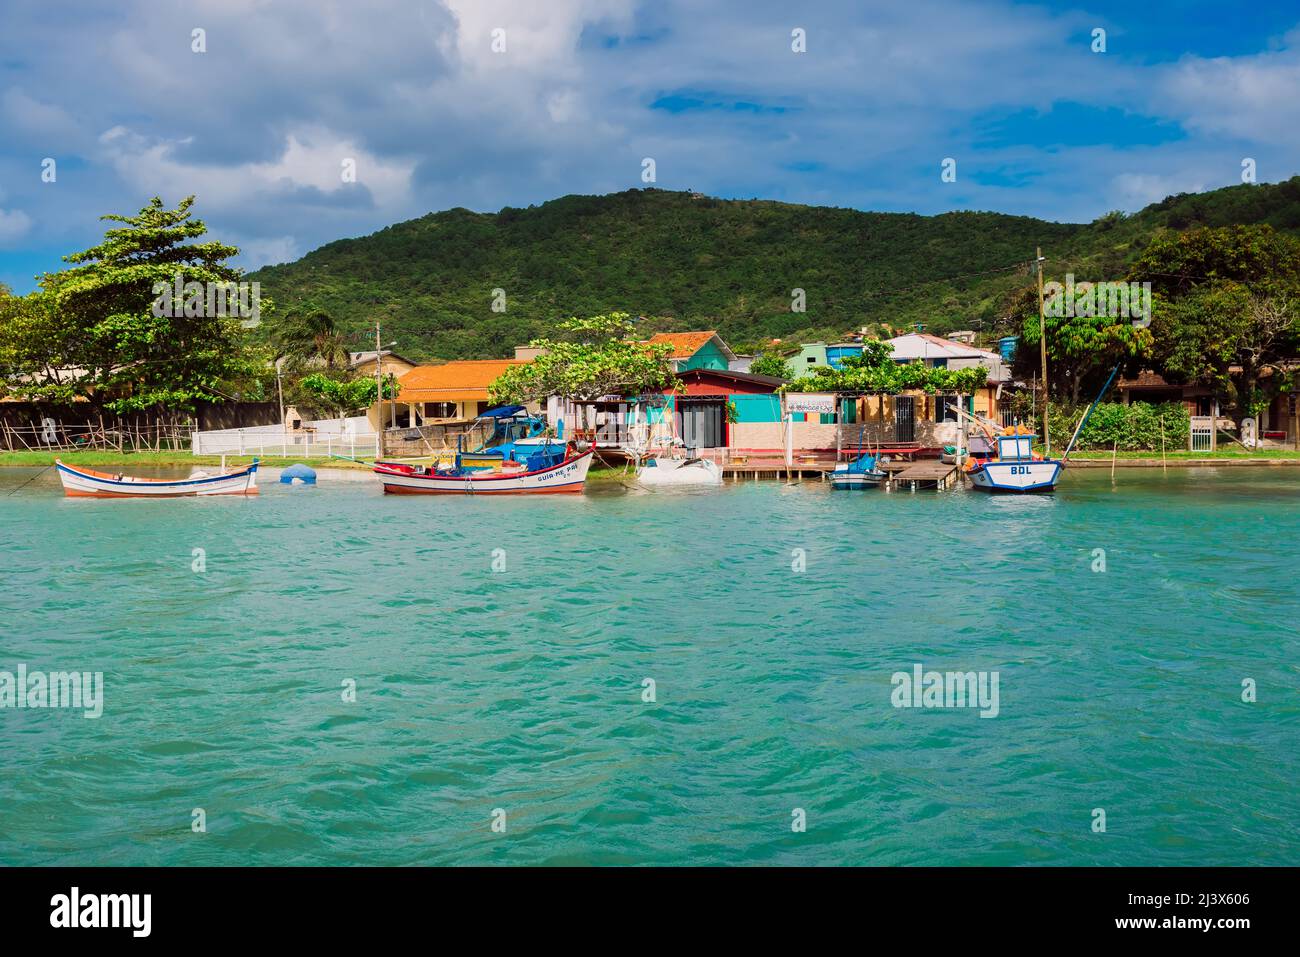 January 6, 2022. Florianopolis, Brazil. Canal of Barra da Lagoa with blue water, boats and houses Stock Photo